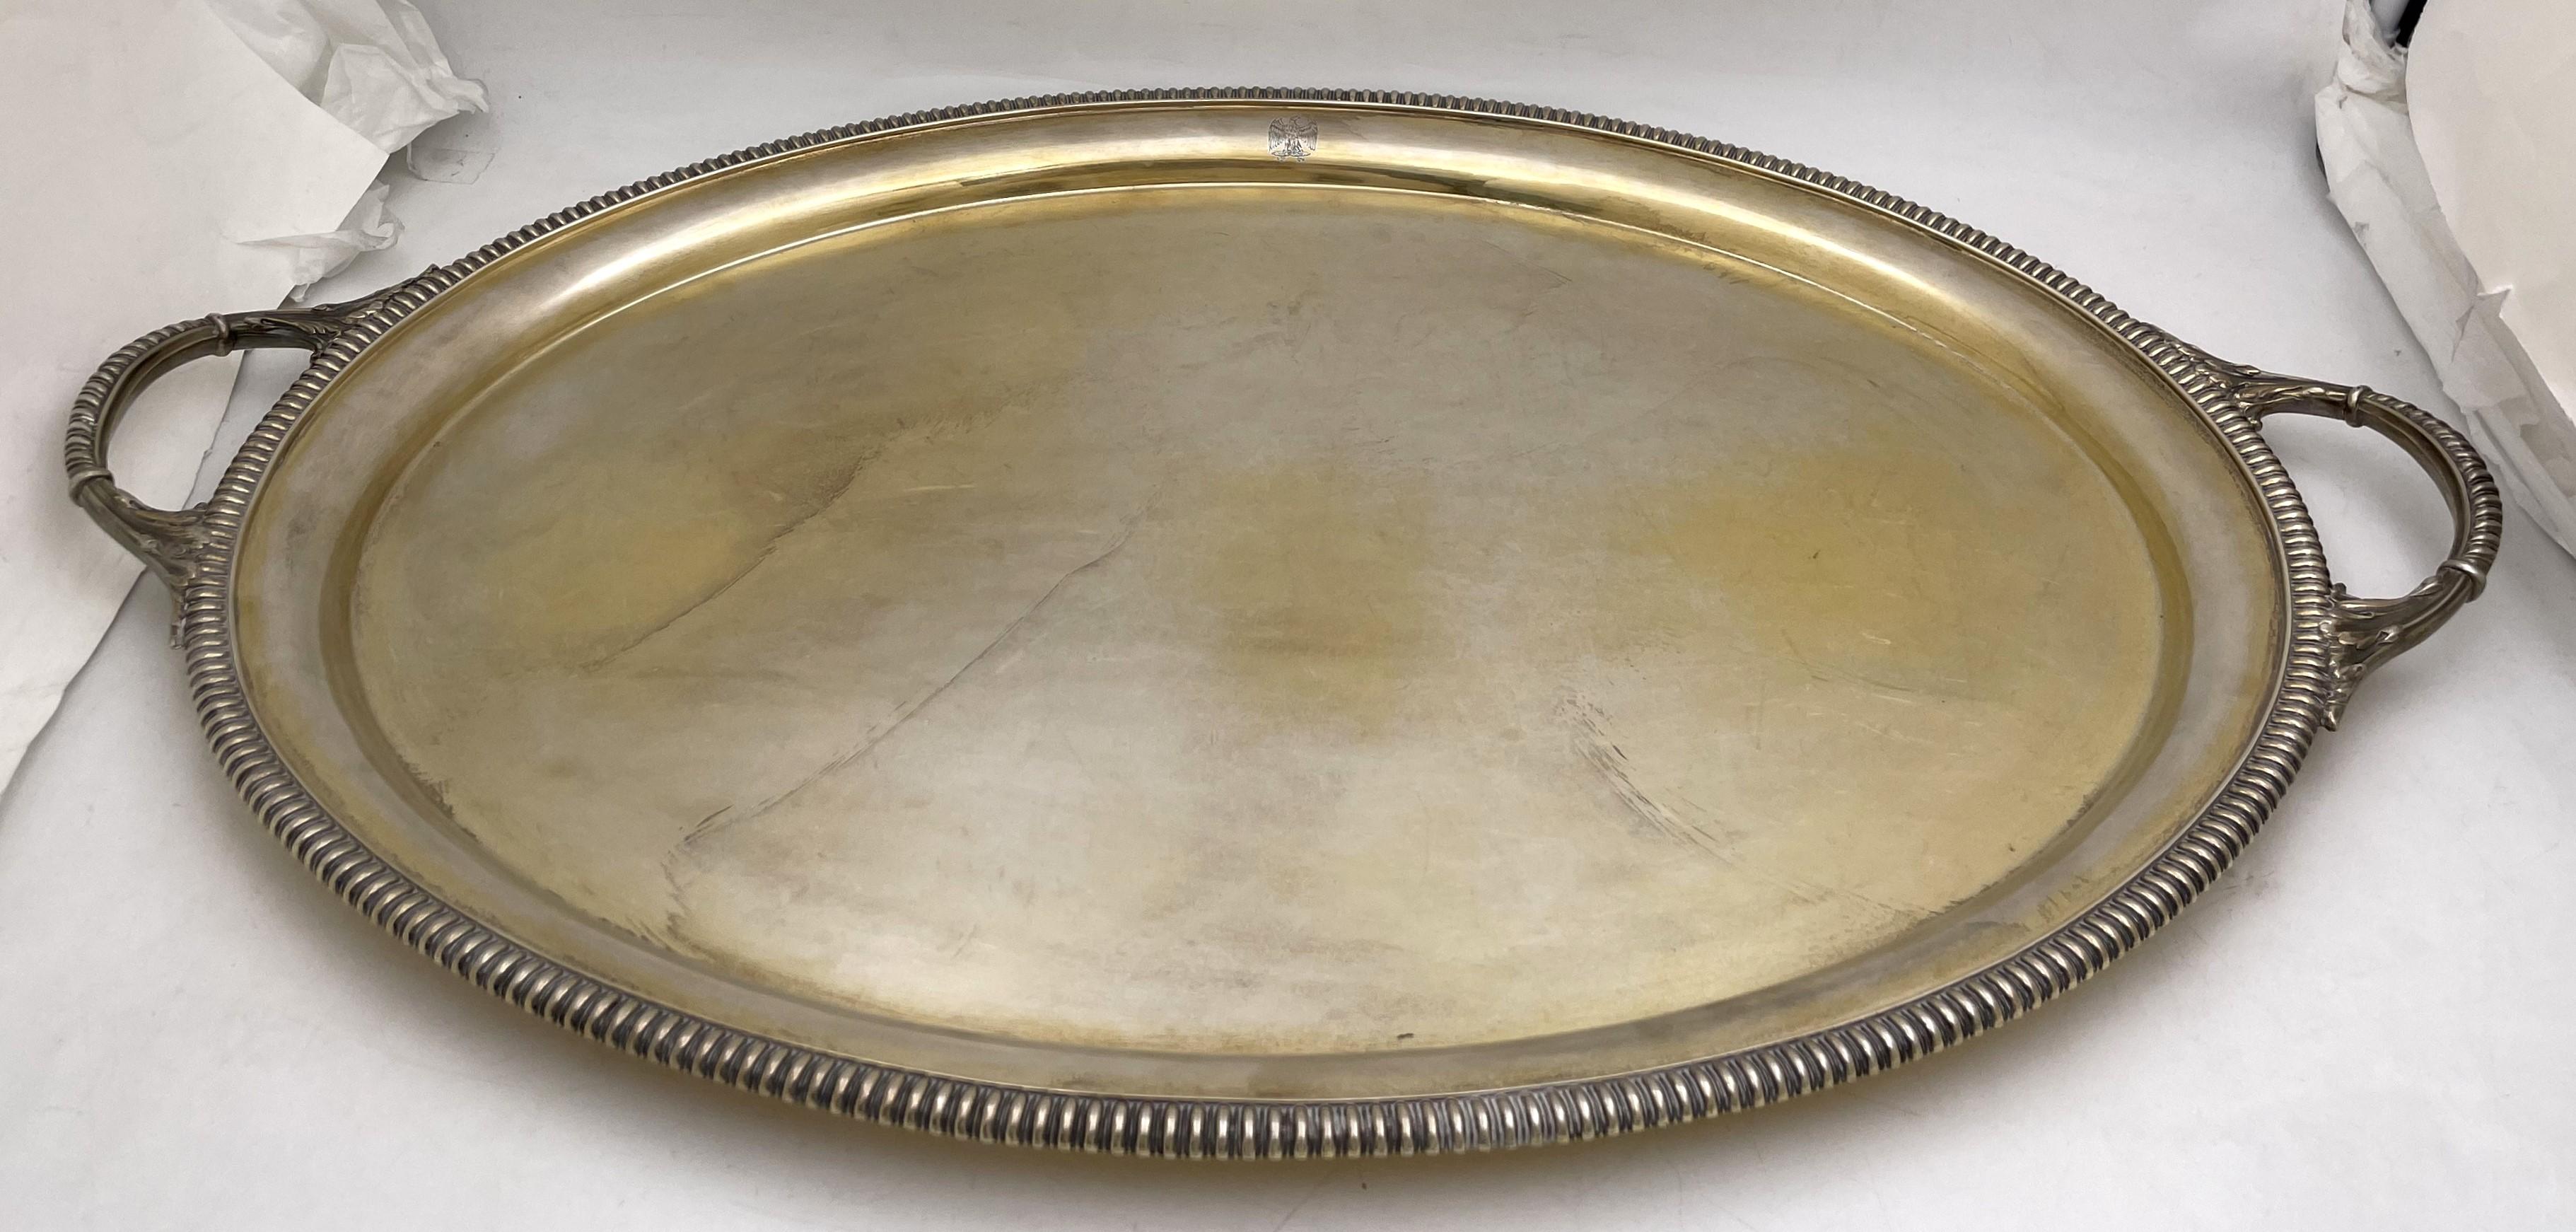 John Spink, Irish gilt sterling silver two-handled tray from 1939 with a gadrooned rim, an eagle motif, and in an elegant design reminiscent of the Regency style. It measures 27 1/2'' from handle to handle (24'' excluding the handles) by 18'' in